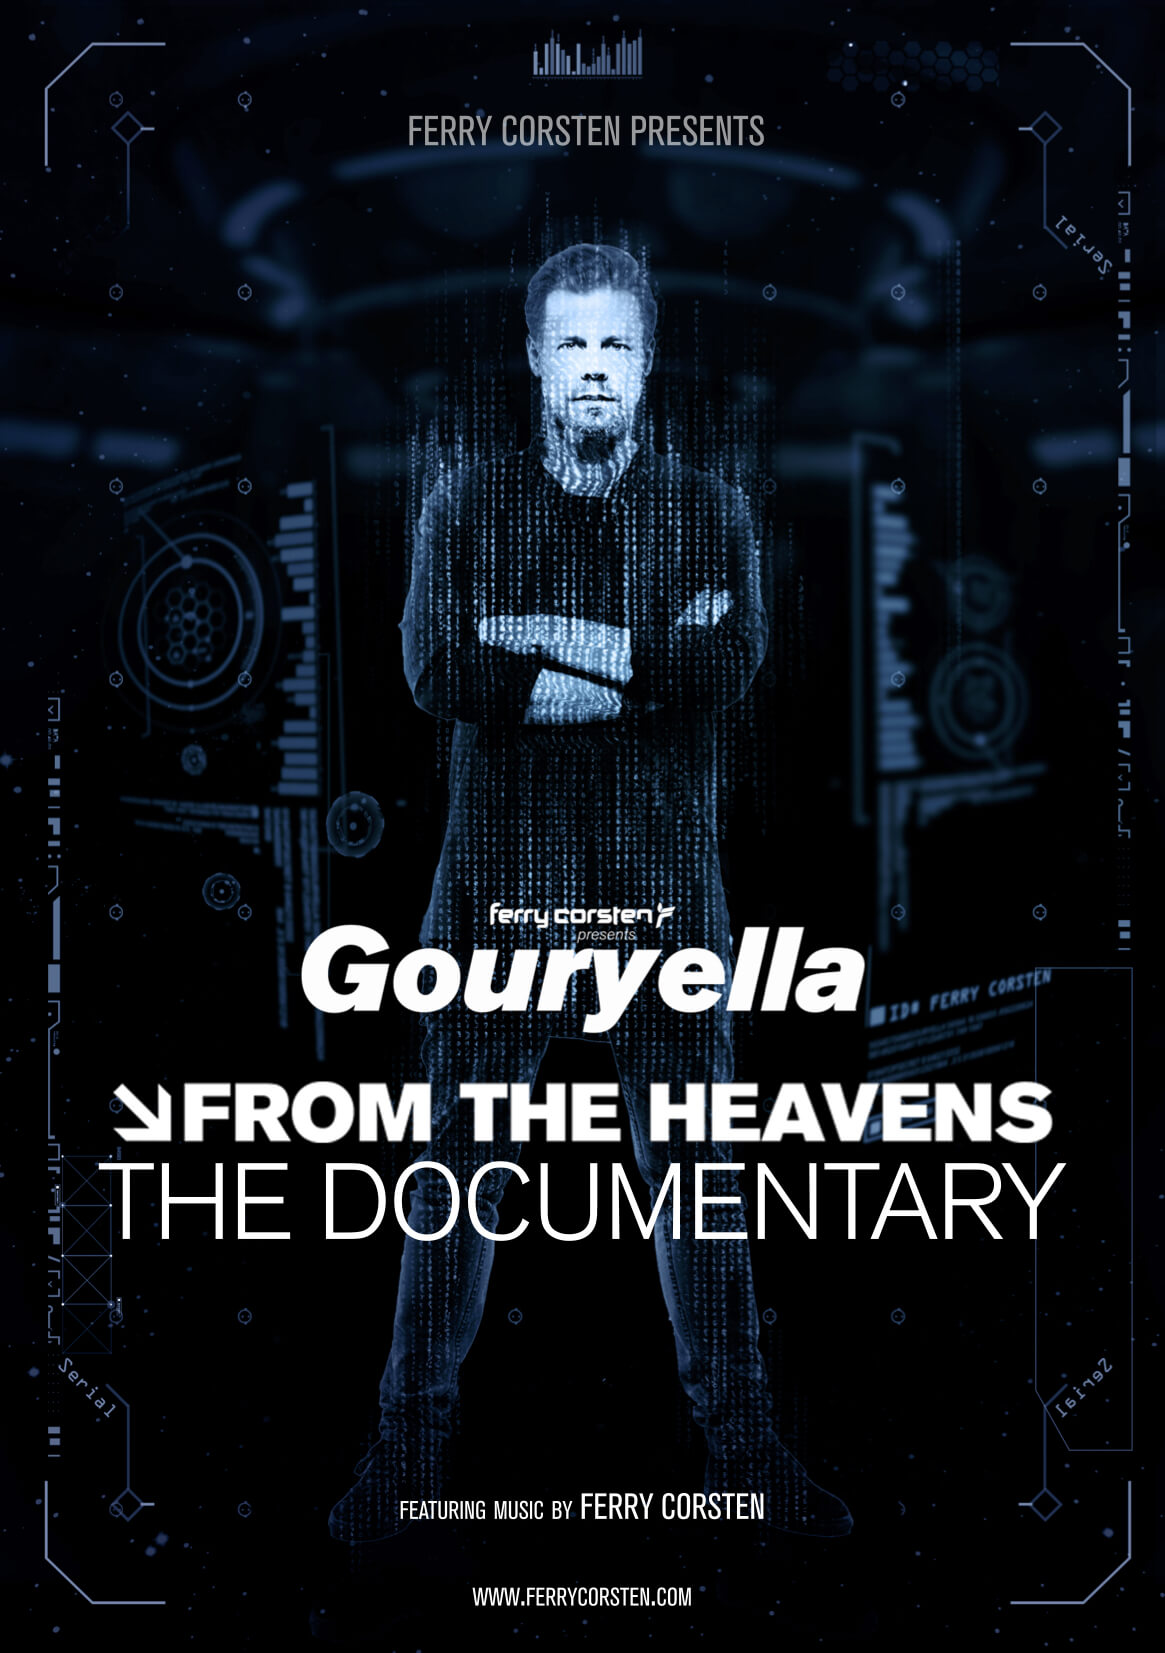 Ferry Corsten presents Gouryella - From The Heavens documentary